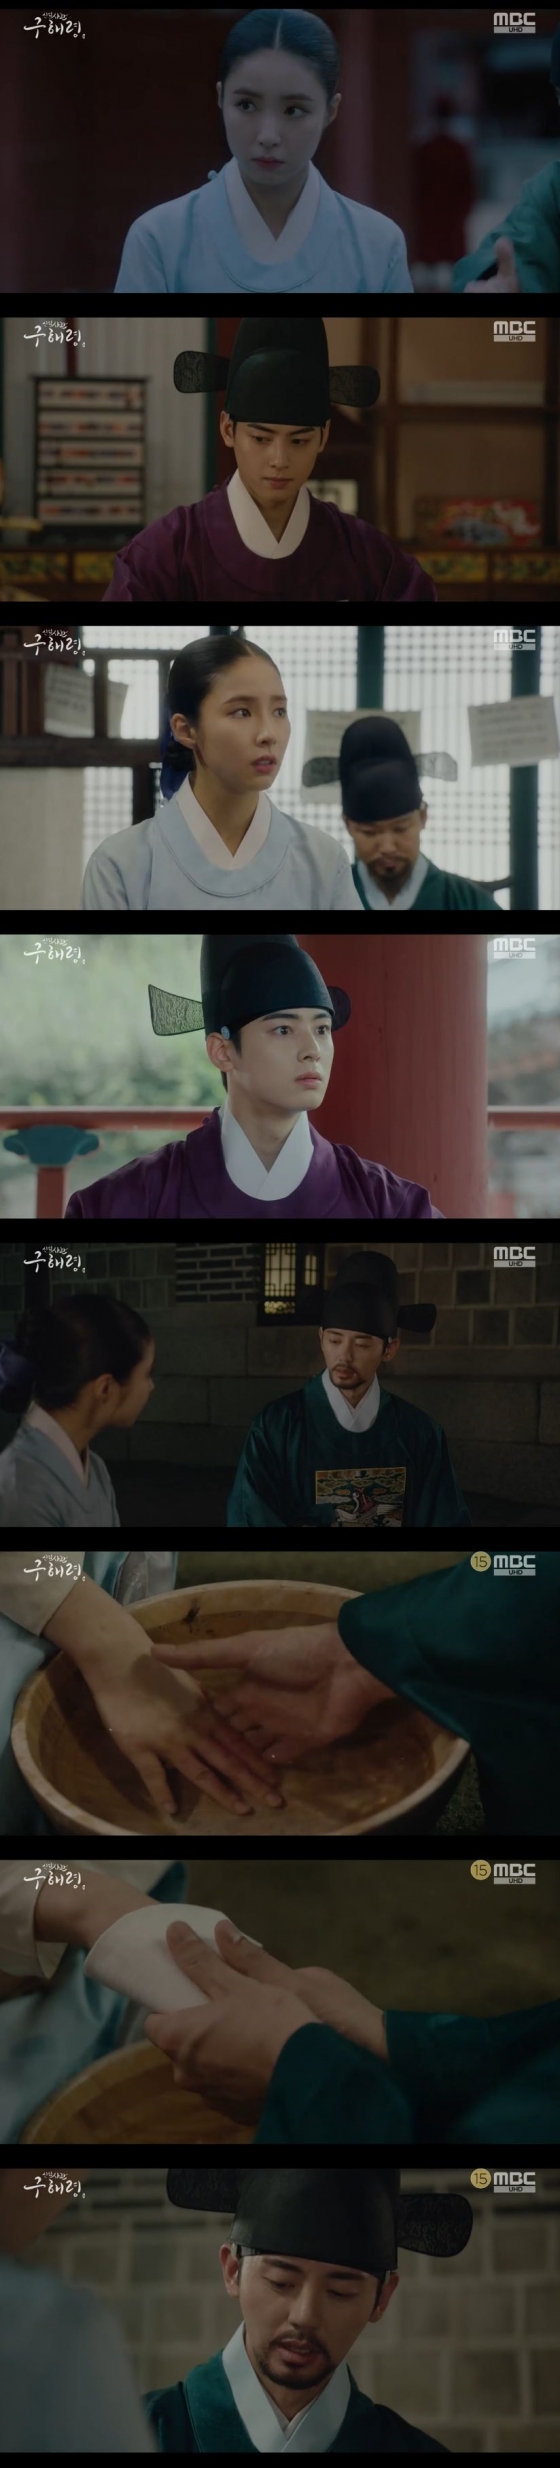 Shin Se-kyung of Drama newcomer Rookie Historian Goo Hae-ryung has received the attention of Cha Eun-woo and Lee Ji-hoon.MBC Tree Drama The New Entrepreneur Rookie Historian Goo Hae-ryung (playplayed by Kim Ho-soo, directed by Kang Il-soo and Han Hyun-hee) was broadcast on the afternoon of the 22nd, and featured a figure of Min Woo-won (Lee Ji-hoon) expressing his heart Rookie Historian Goo Hae-ryung (Shin Se-kyung).On this day, Lee Tae (Kim Min-sang) made a direct statement to Lee Tae, pointing out the mistake, saying, I raised the draft before the preparation and called the Dawon army.The tax collector Lee Jin (Park Ki-woong) asked Itae to give him a generous look because he was worried about Lees comfort. I thought he was a pathetic person who could write a coalition novel.The bloodline cant be deceived, he said.Lee said to Husambo (Sung Ji-ru), What was the look of Rookie Historian Goo Hae-ryung when I talked about it?I was impressed by the look? A nice look? He said. I did not answer as if I were pathetic.Rookie Historian Goo Hae-ryung was able to catch the brush while taking the civil war entrance examination of Itae regardless of time.Did you catch the brush too hard? It is not just the officers job to write quickly.Learn how to write that way with the feeling that you are flowing without power in your hands. You will have more brushes in the future. Rookie Historian Goo Hae-ryung said, Do you think that Minbonggyo has a future for me as a cadet?I have been to Oxa, a bank account, and I have been to Oxa since I was a few months in the office. I wonder if I will be exiled to Jeju Island exactly a half year later. Min Woo-won said, I will not let you do that again. Rookie Historian Goo Hae-ryung said, Like you did a branch appeal this time? I heard the story.Thank you, he said, bowing his head and expressing his gratitude.Minwoo won the hand of the injured Rookie Historian Goo Hae-ryung with a cloth and said, Im sorry. Im sorry.No one will blame. Rookie Historian Goo Hae-ryung said, I think it was a real frog in my past life.I really want to see the end once you say that. On this day, Min Woo-won took one step closer to Rookie Historian Goo Hae-ryung.Is it because Rookie Historian Goo Hae-ryung, who always stands up and confronts power without fear, felt attractive as a cadet and a woman?Lee and Rookie Historian Goo Hae-ryung are confirming each others minds and getting closer to each other.However, Min Woo-won also showed the charm as a sub-namju by properly emitting the presence that filled the drama as well as the Irim.The chemistry created by Lee Lim and Rookie Historian Goo Hae-ryung also attracts attention, but Min Woo Won and Rookie Historian Goo Hae-ryung also explode the extraordinary chemistry and instill expectations for viewers what three people will make in the future.